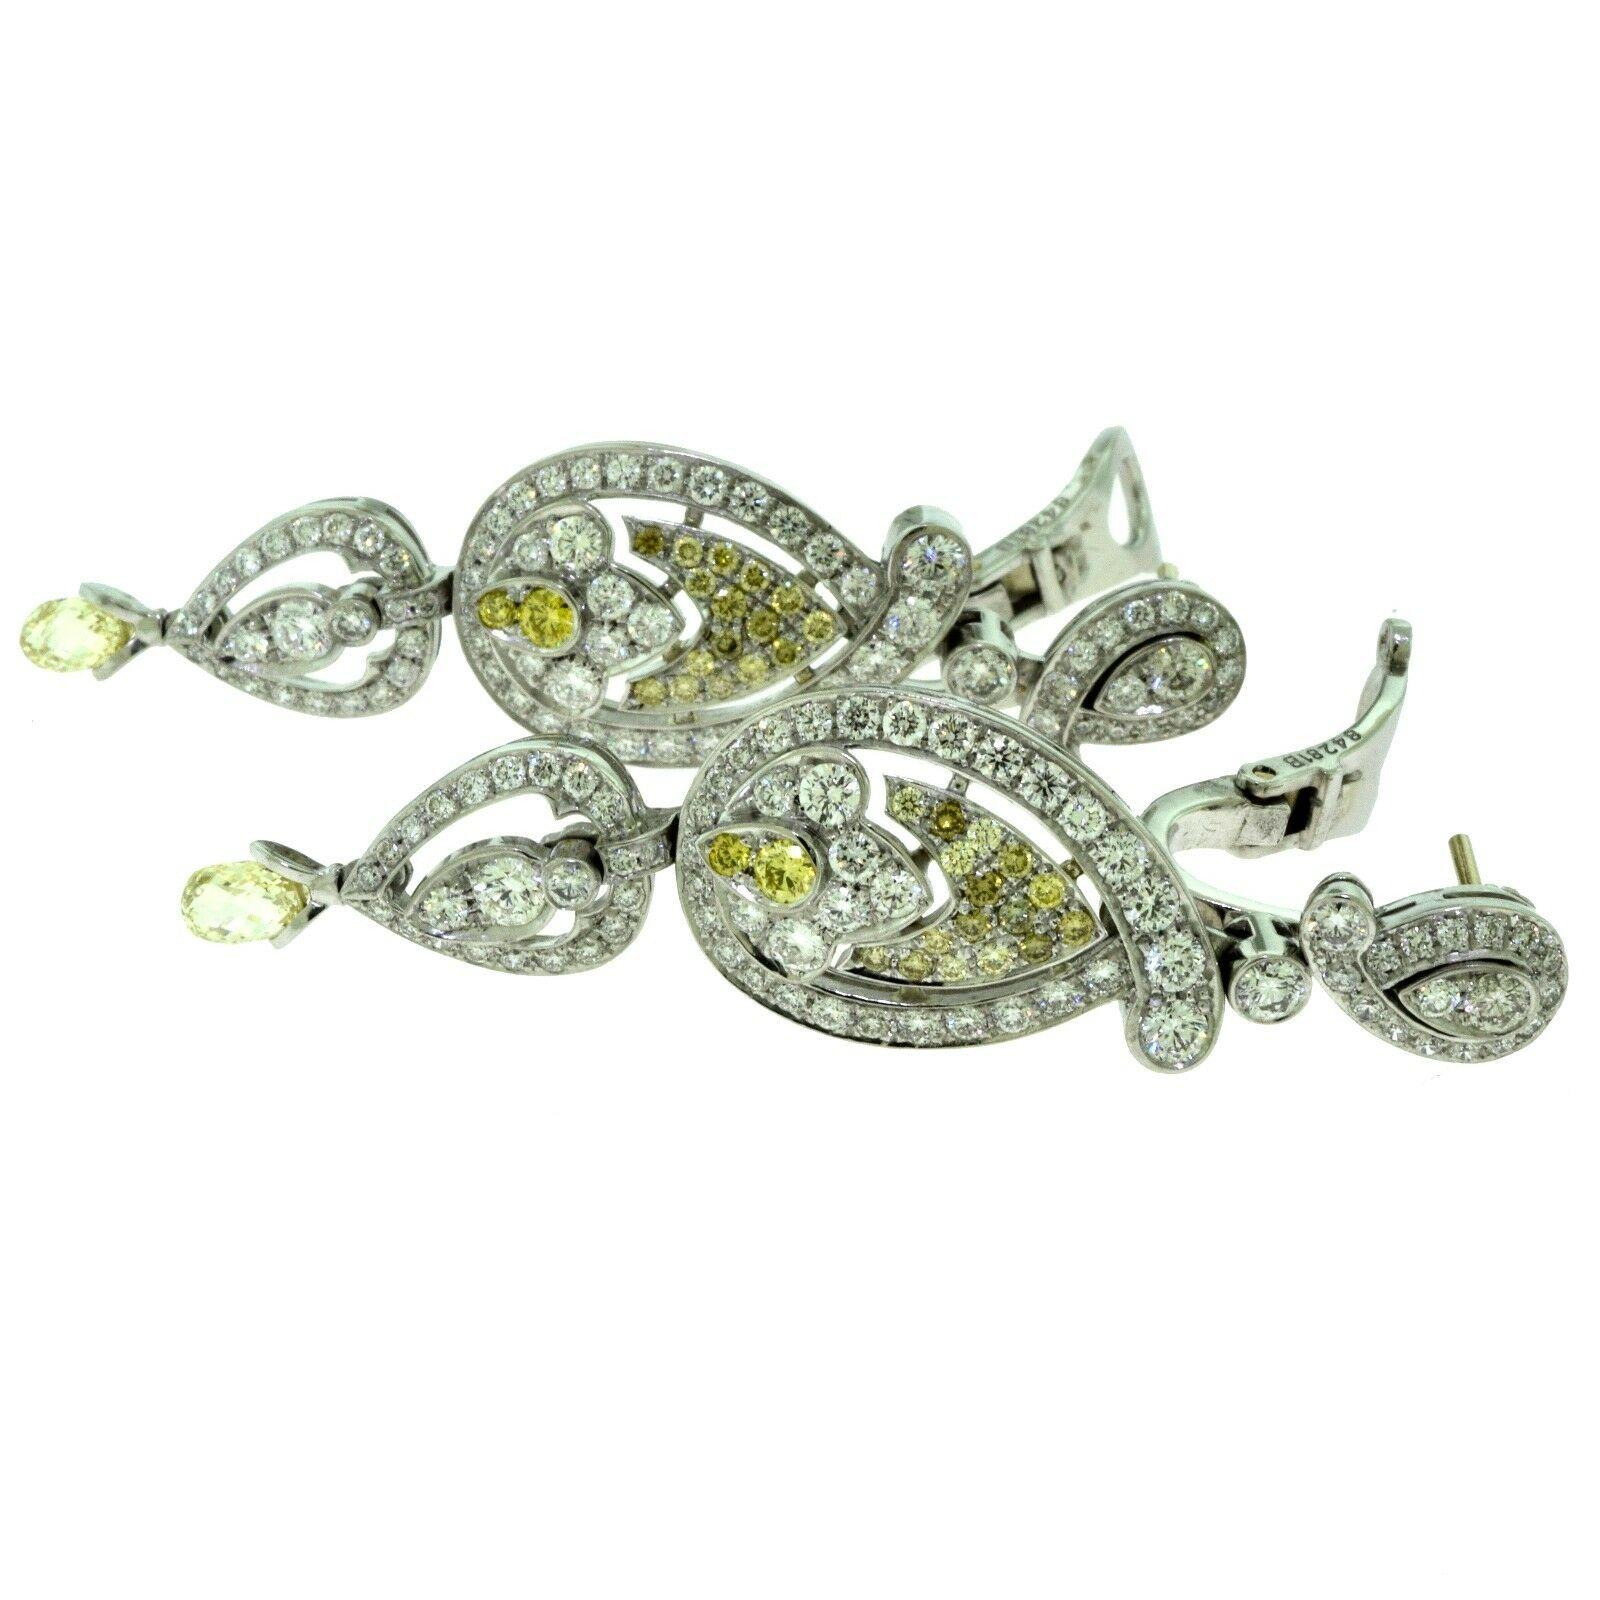 Brilliance Jewels, Miami
Questions? Call Us Anytime!
786,482,8100

Designer: Cartier

Metal: Platinum

Stones: Yellow Diamonds

                  White Diamonds

Total Carat Weight: 10 ct

Total Item Weight (g): 25.85

Length: 2.05 inches

Hallmark: